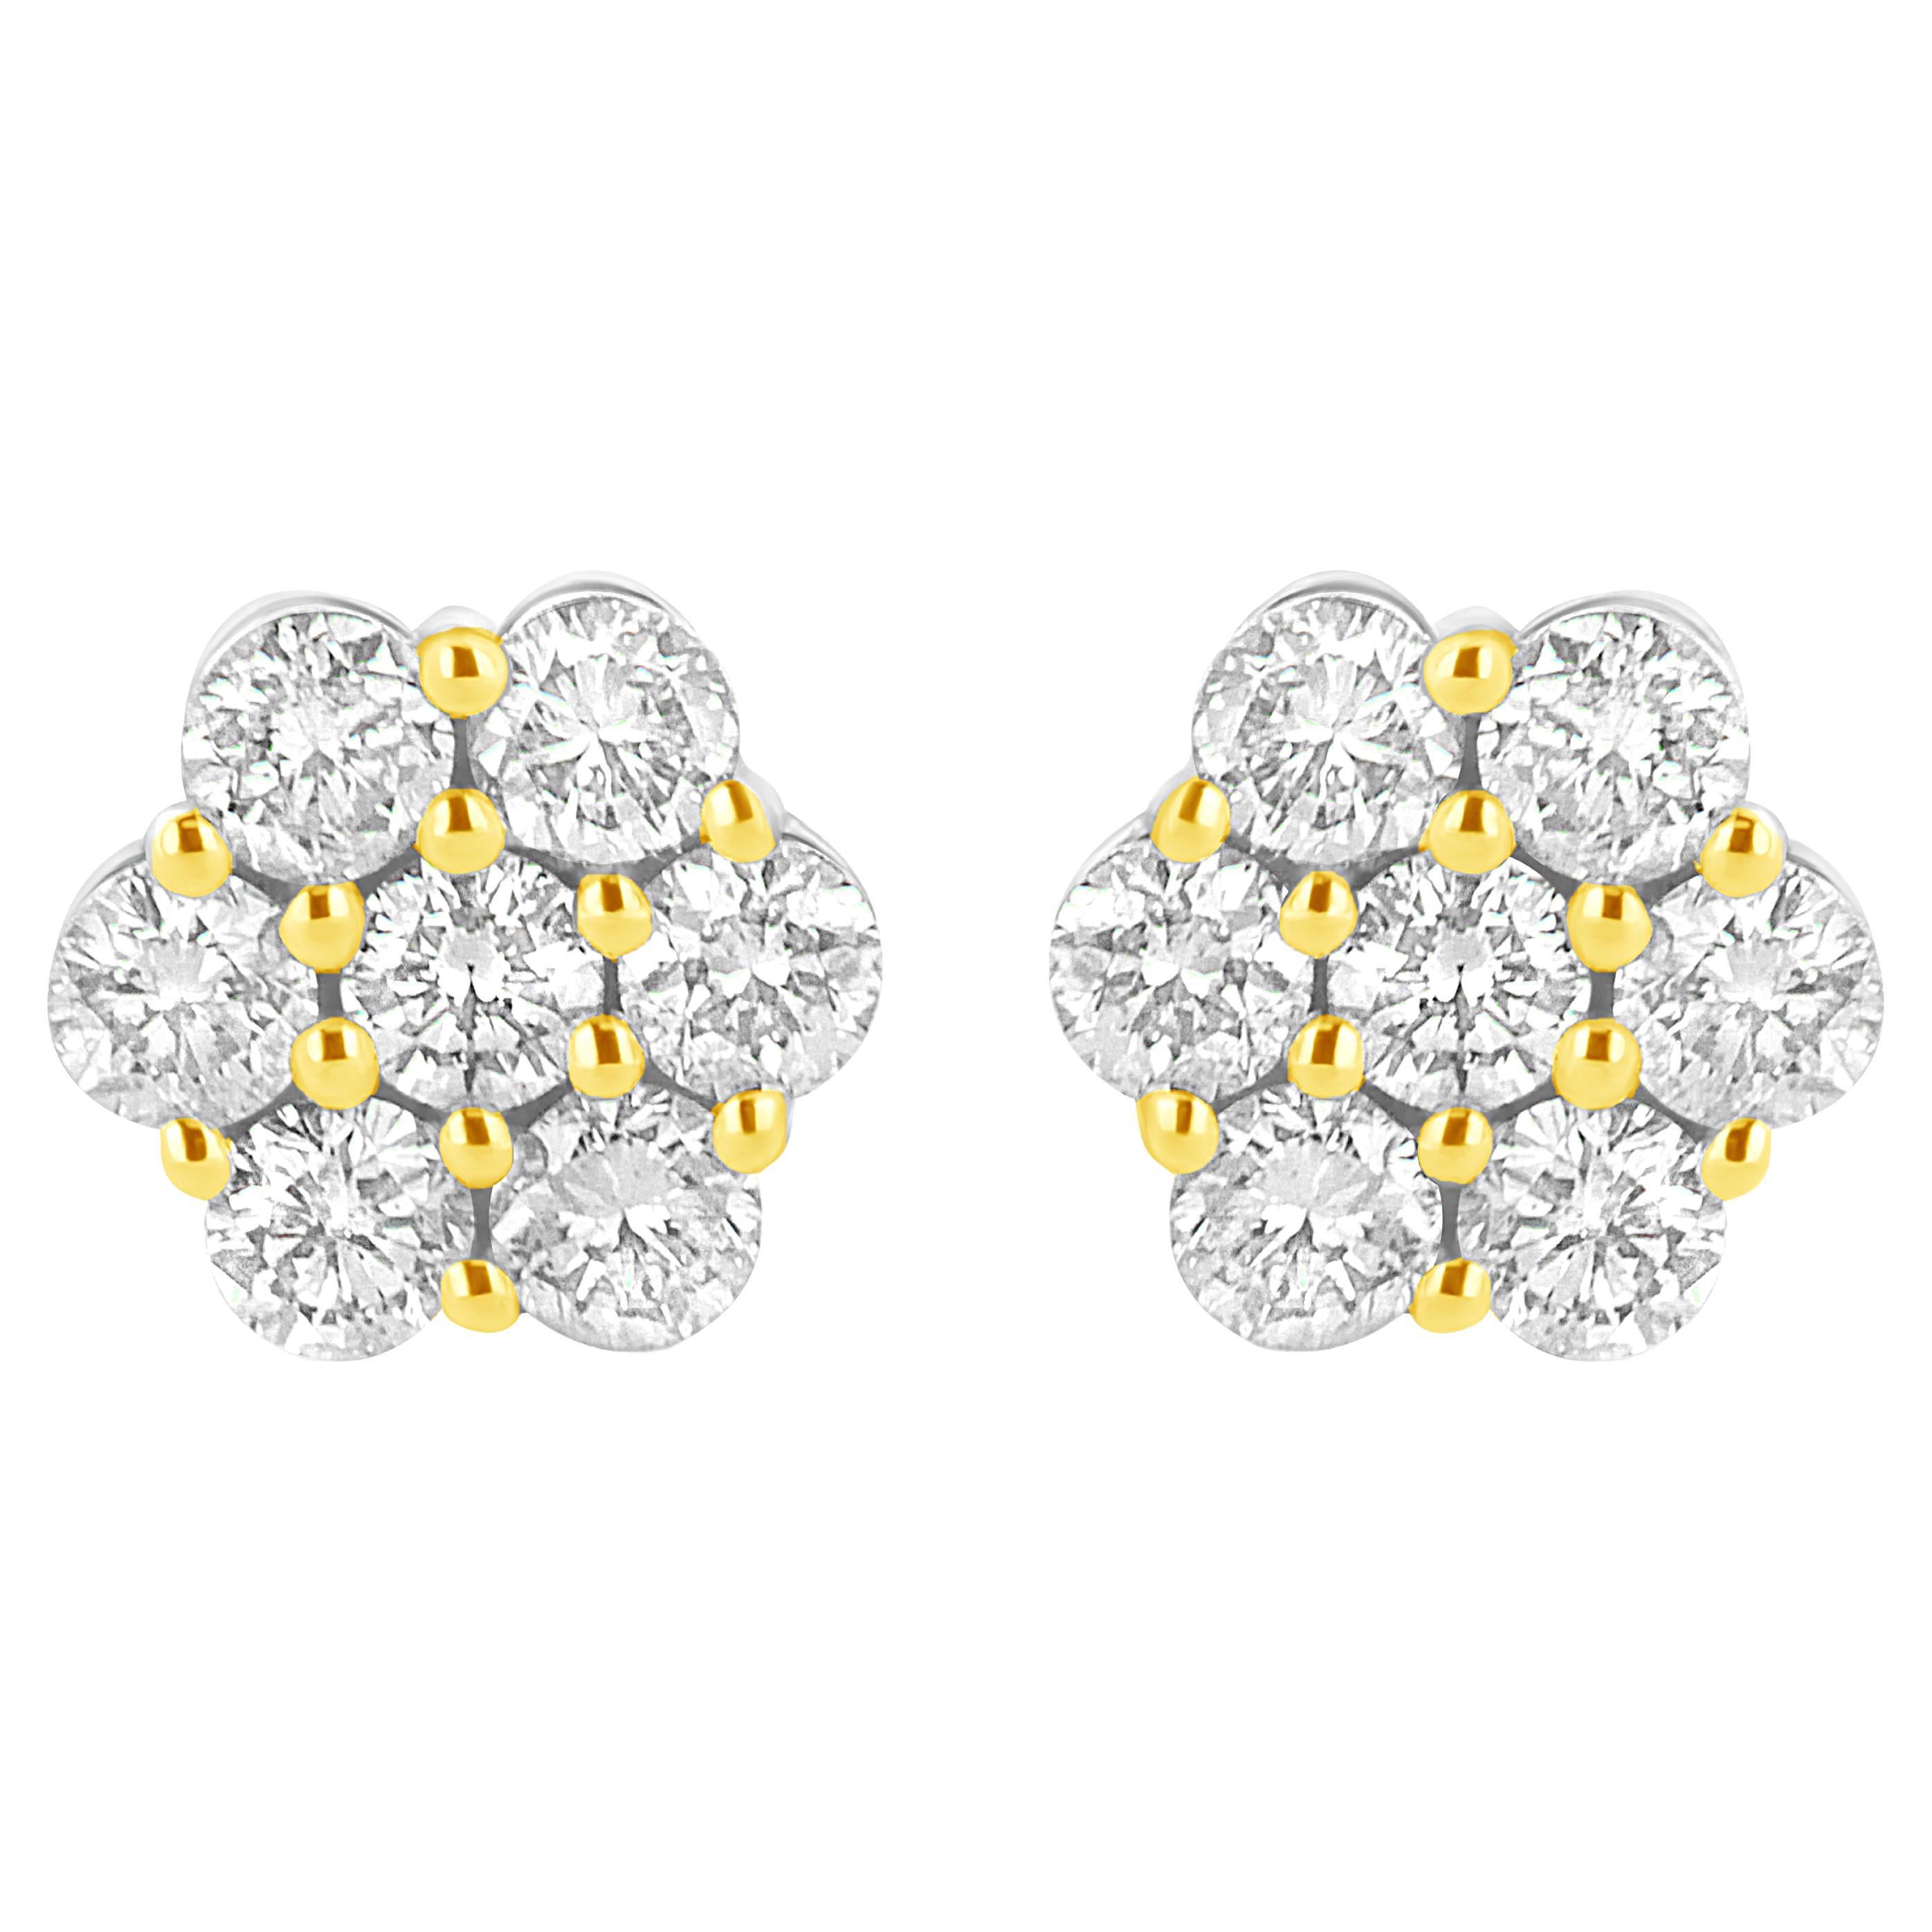 Yellow Gold Plated Sterling Silver 1/4 Carat Diamond Floral Cluster Stud Earring